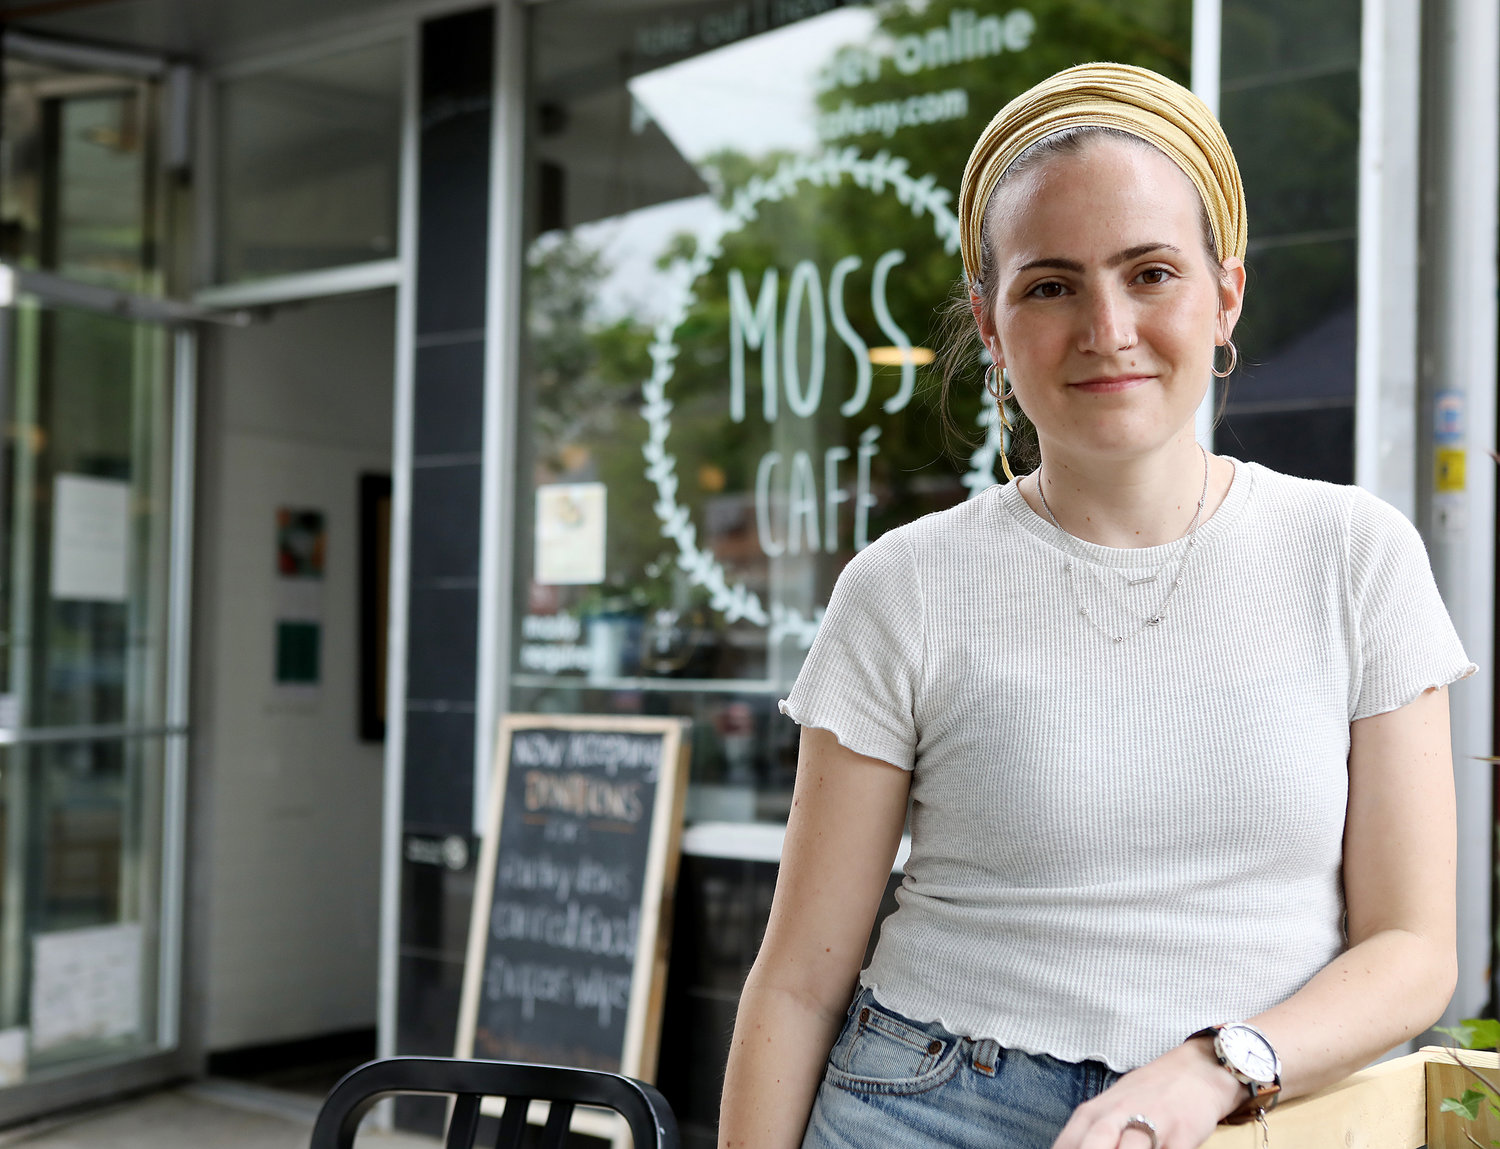 During her third pregnancy and birth, Moss Café owner Emily Weisberg forged a friendship with Emilie Rodriguez and Myla Flores. Now, they’re working together to deliver meals to families across the Bronx that have just welcomed a new baby into their home.